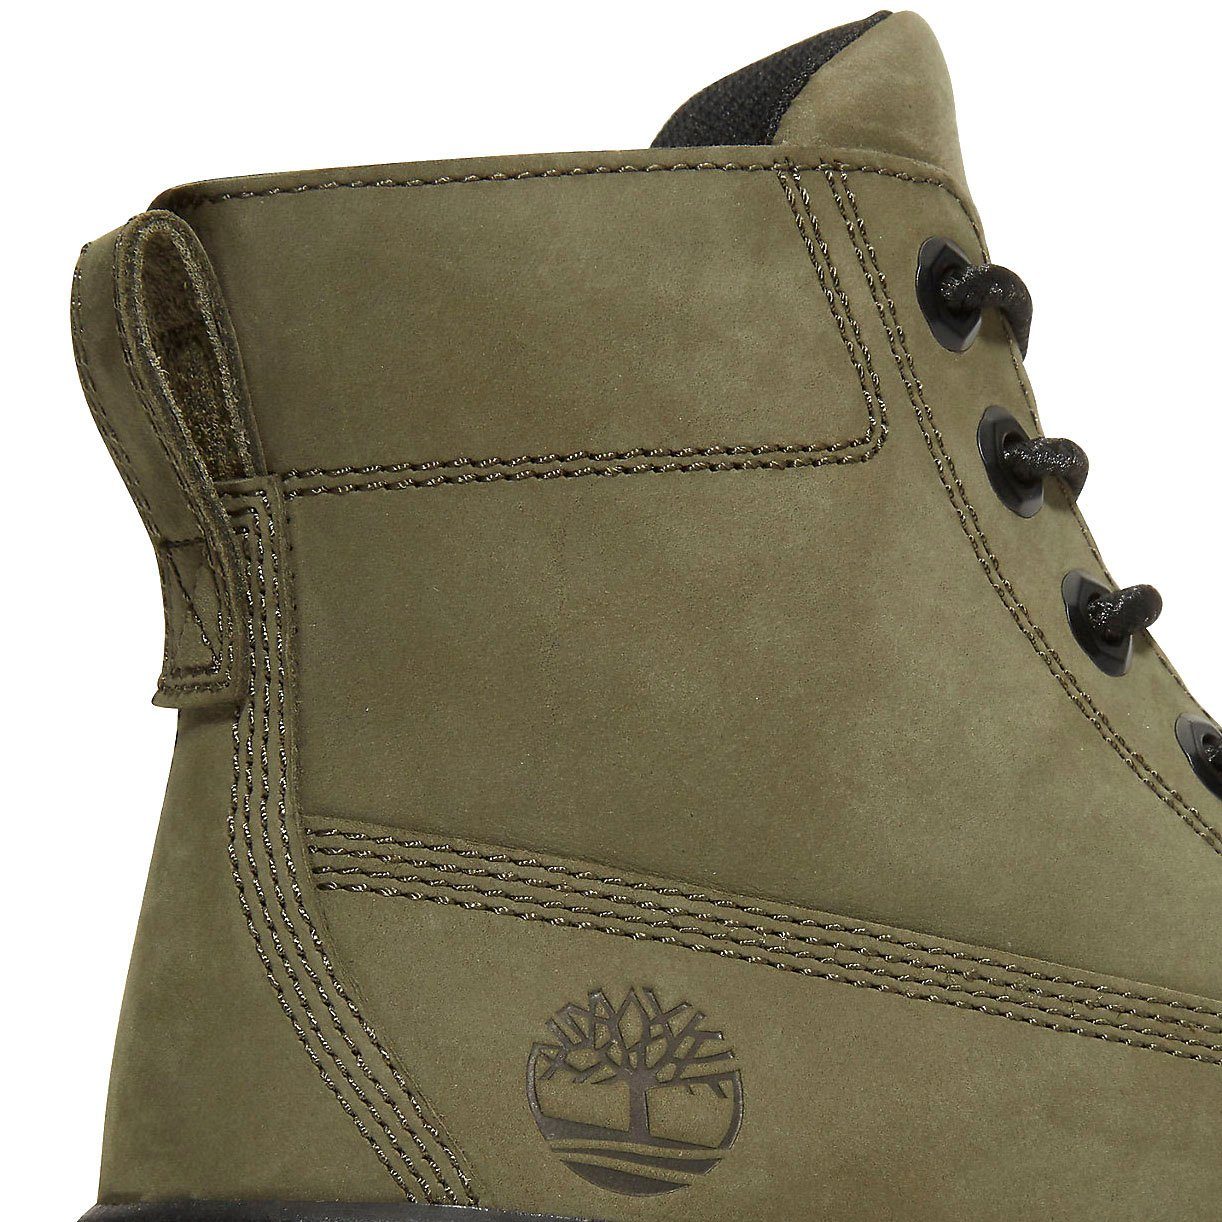 Timberland Greyfield Leather Boot Schnürboots oliv